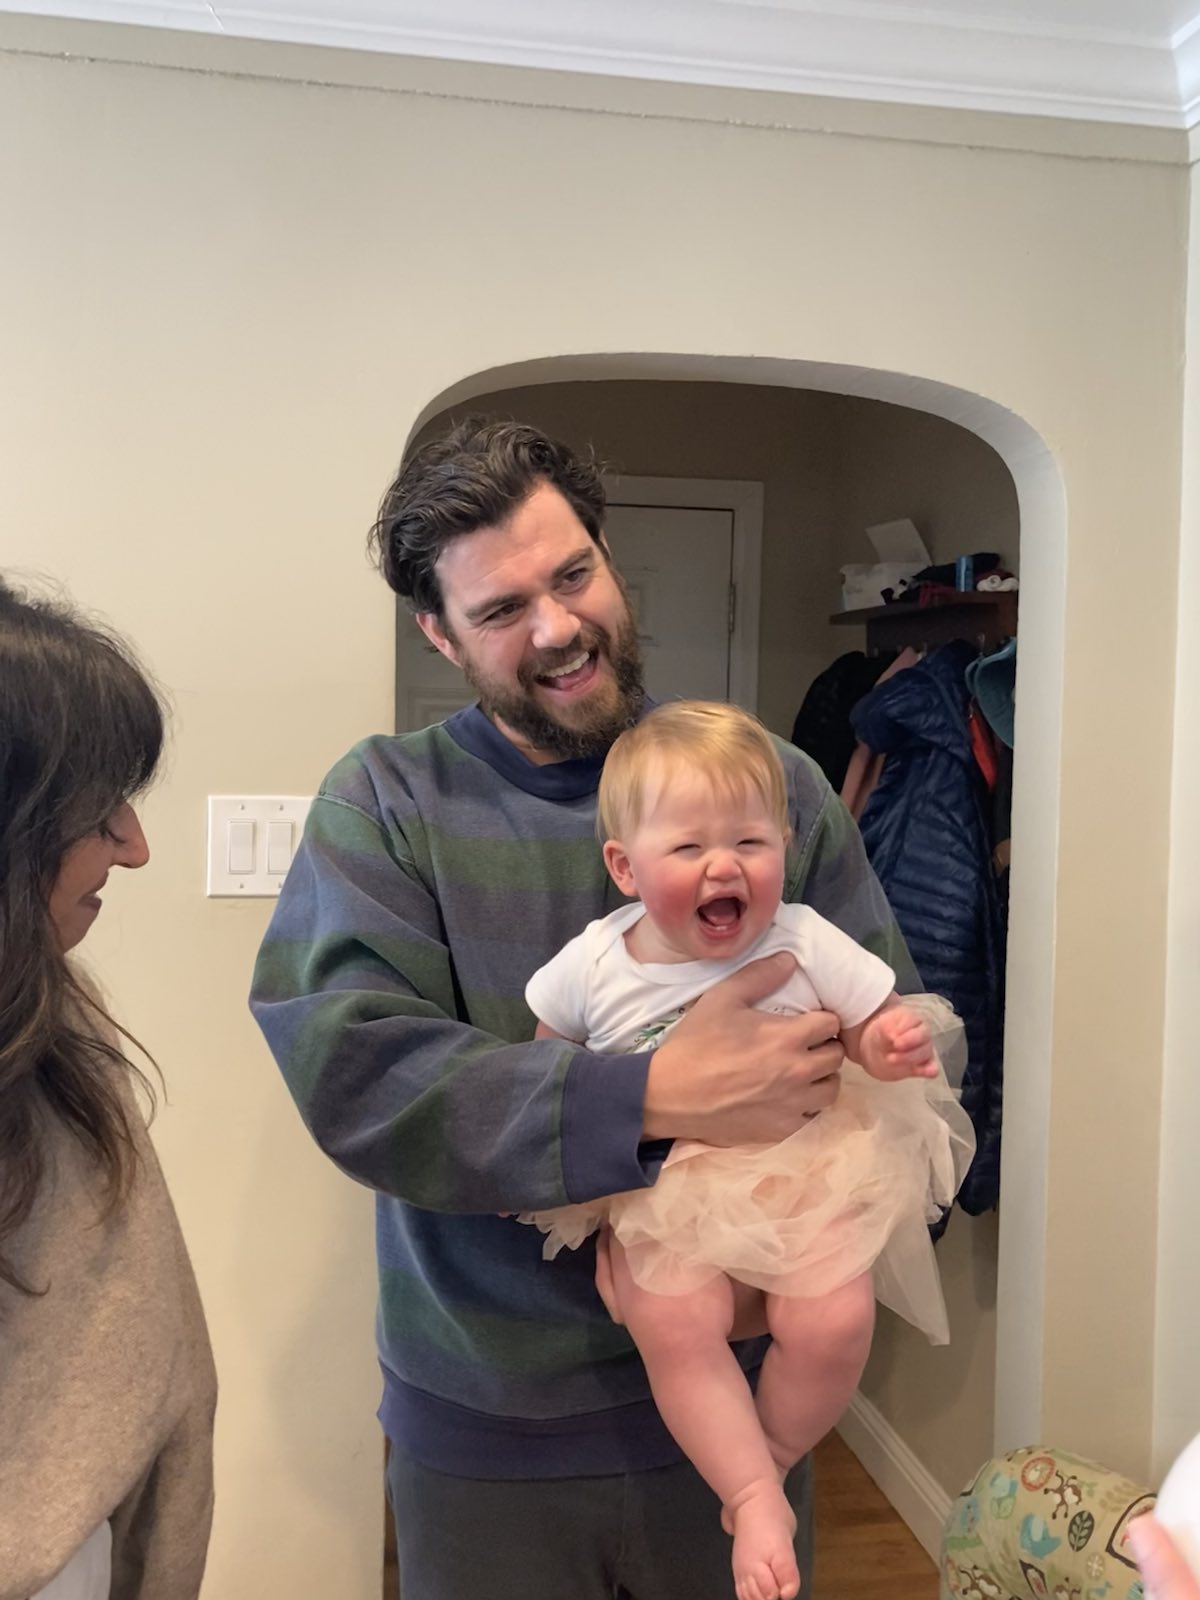 Baby laughing Blank Meme Template